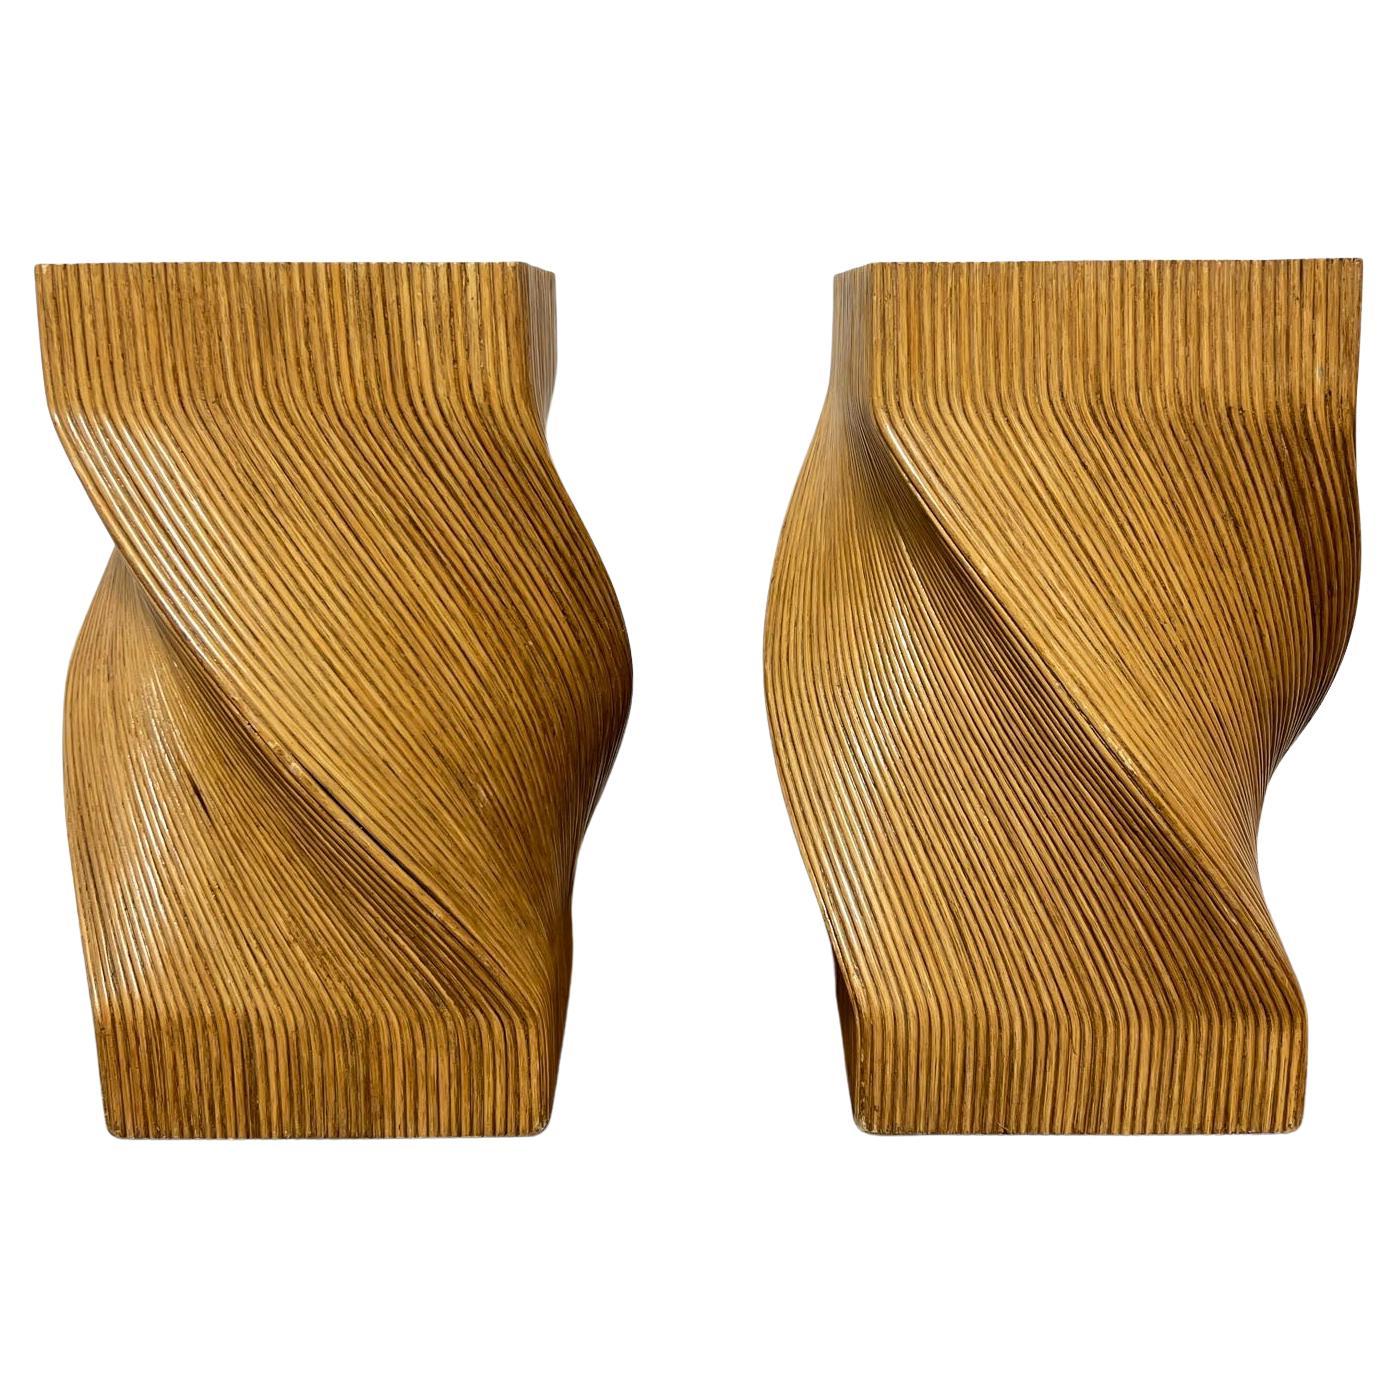 Pair of Split Reed Side Tables or Pedestals Circa 1970s